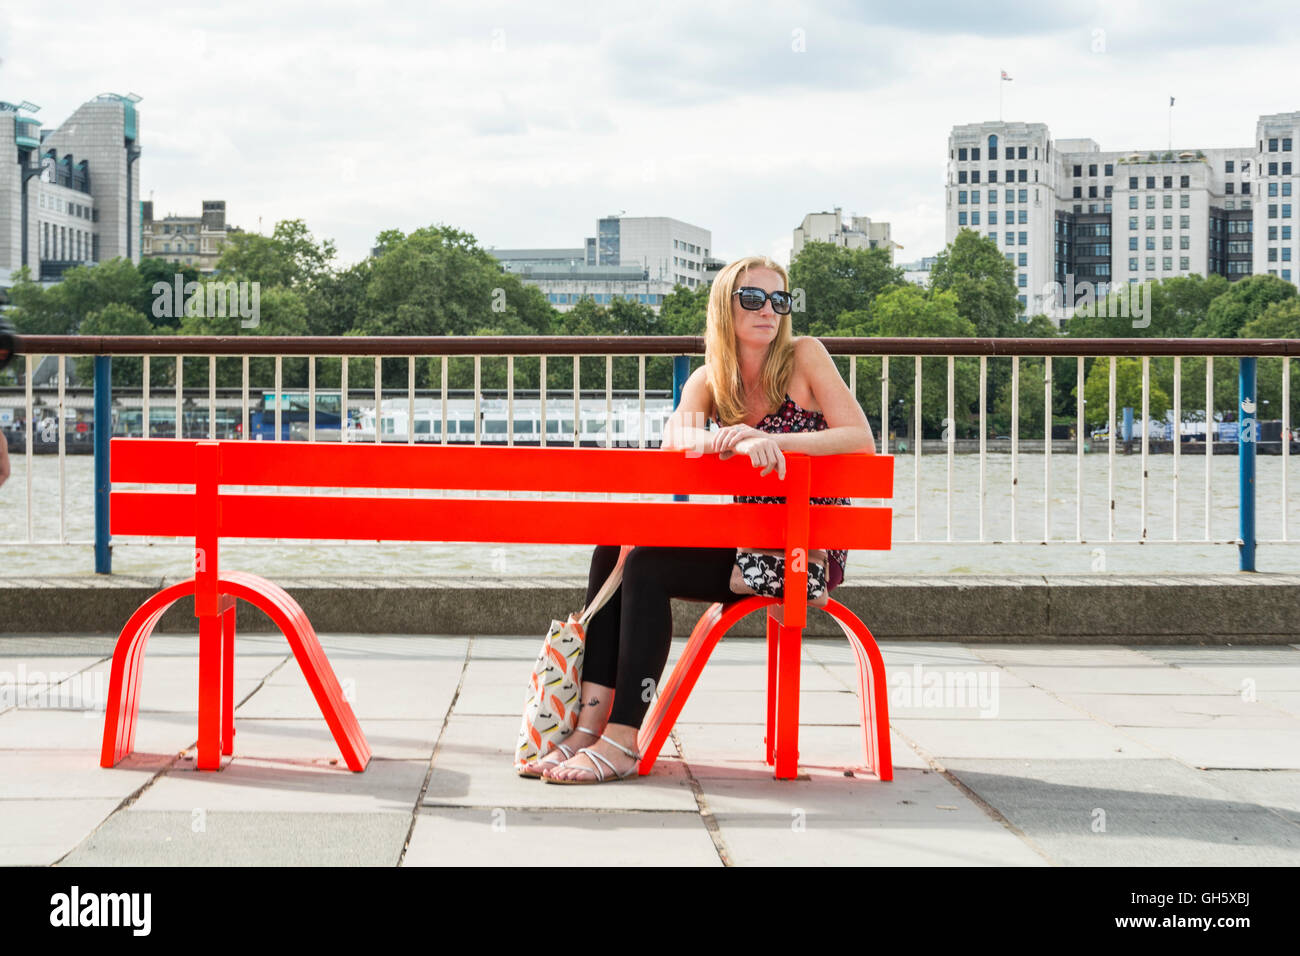 A woman sitting on one of Jeppe Hein's Modified Social Benches on London's South Bank, SE1, UK Stock Photo